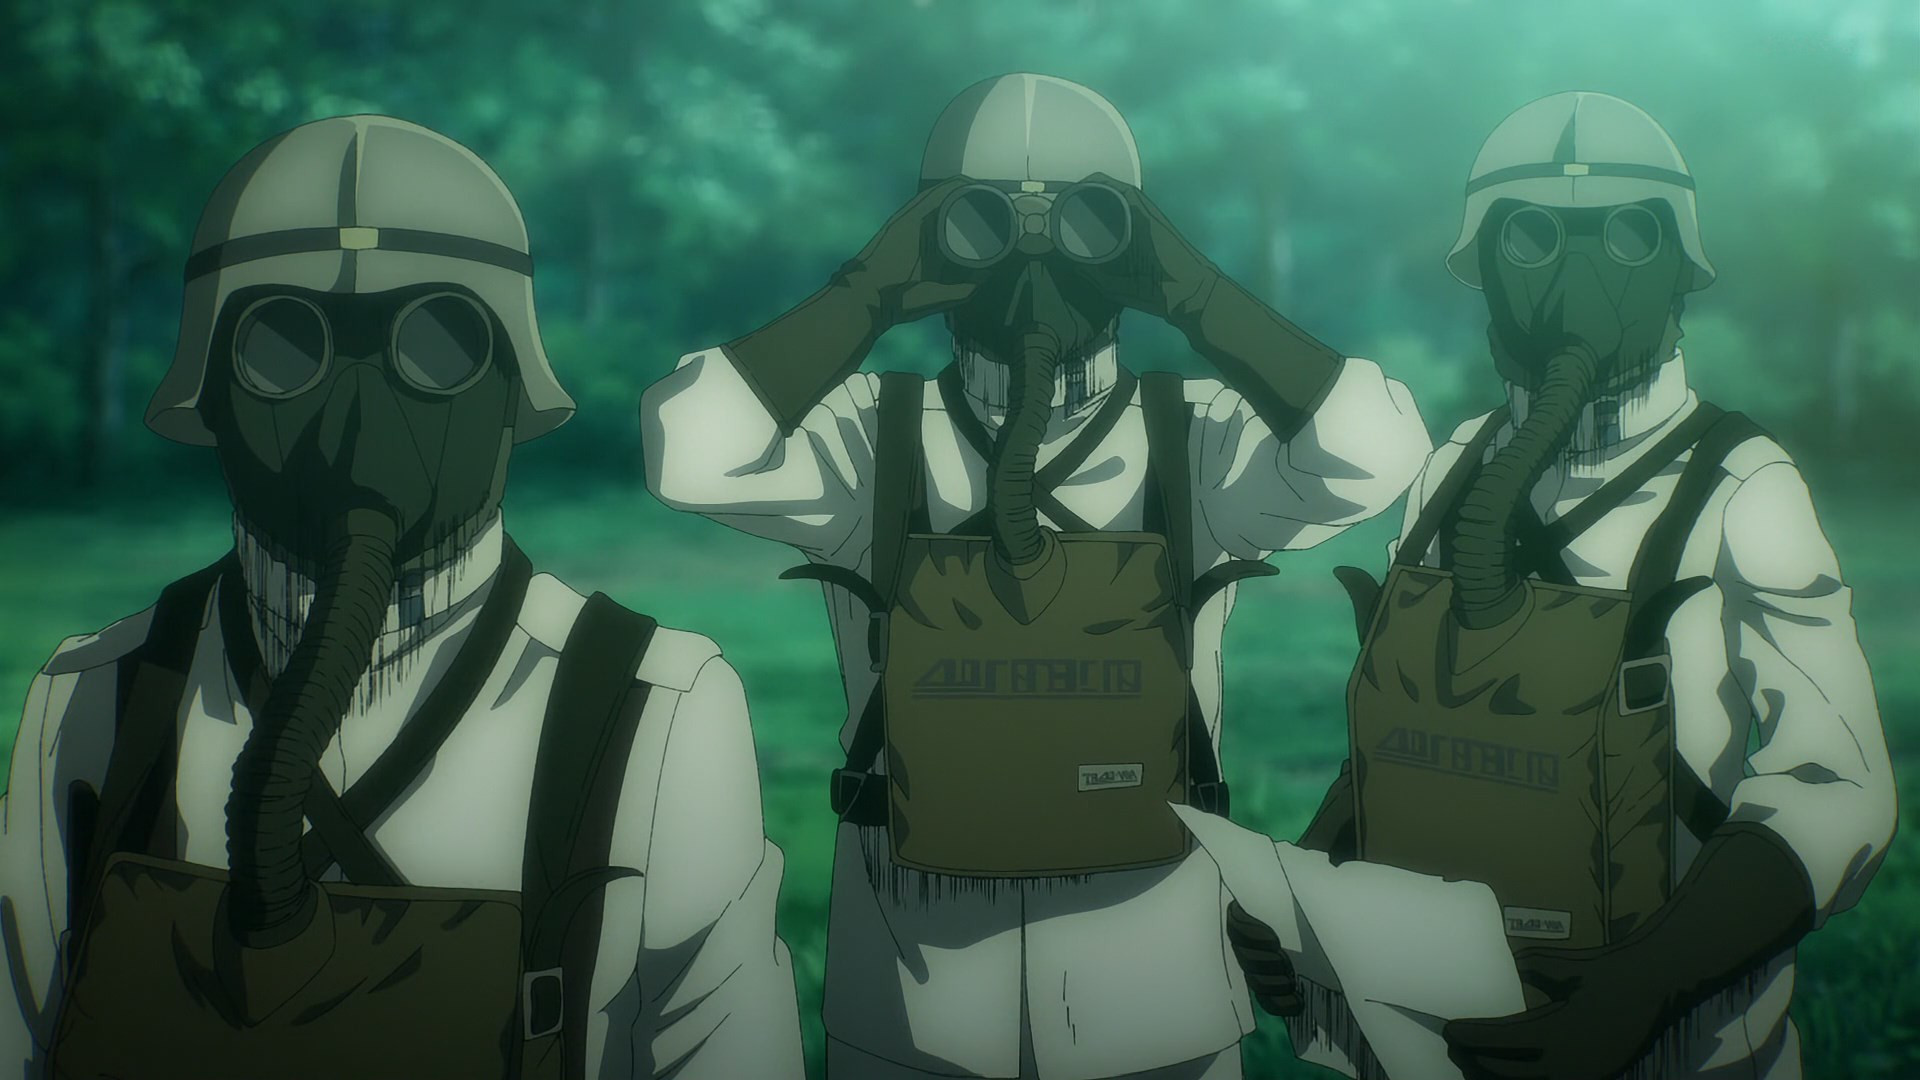 In Shingeki No Kyojin (2013-2023) an oppressed and prosecuted group creates  a militarist fascist state which goal is to cause a genocide masking it as  self-defense. This references nothing at all. 